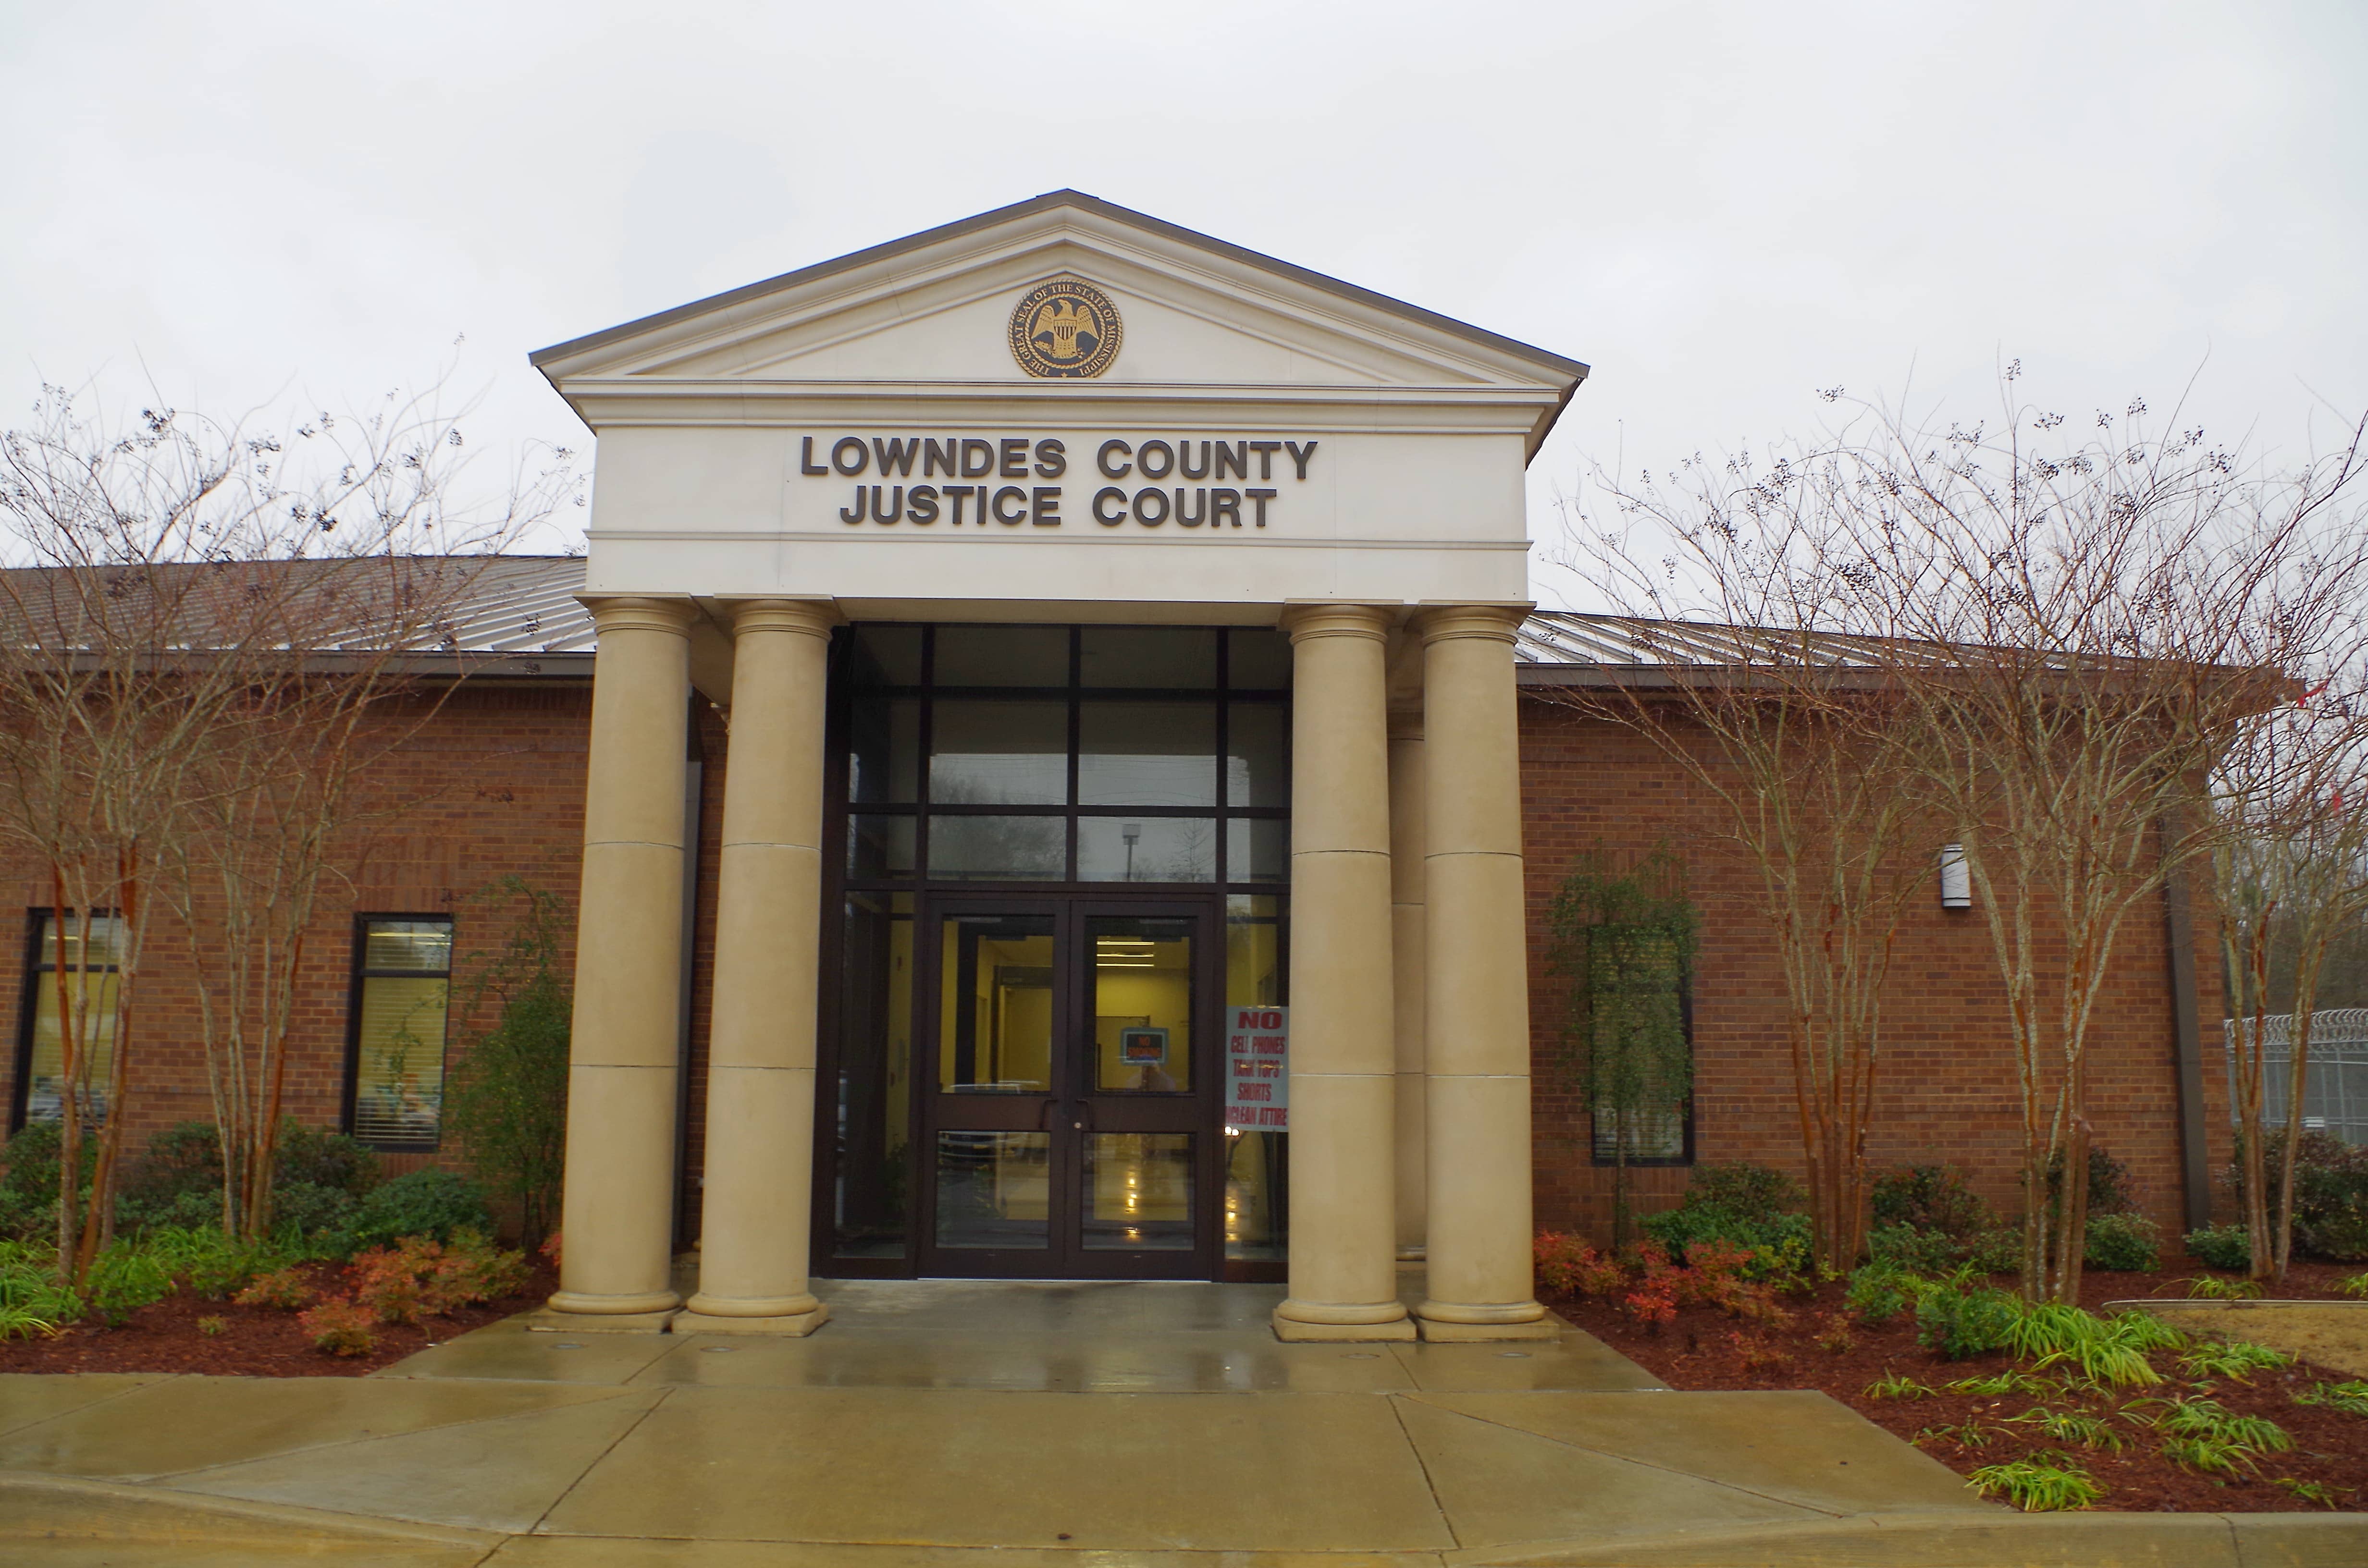 Image of Lowndes County Justice Court